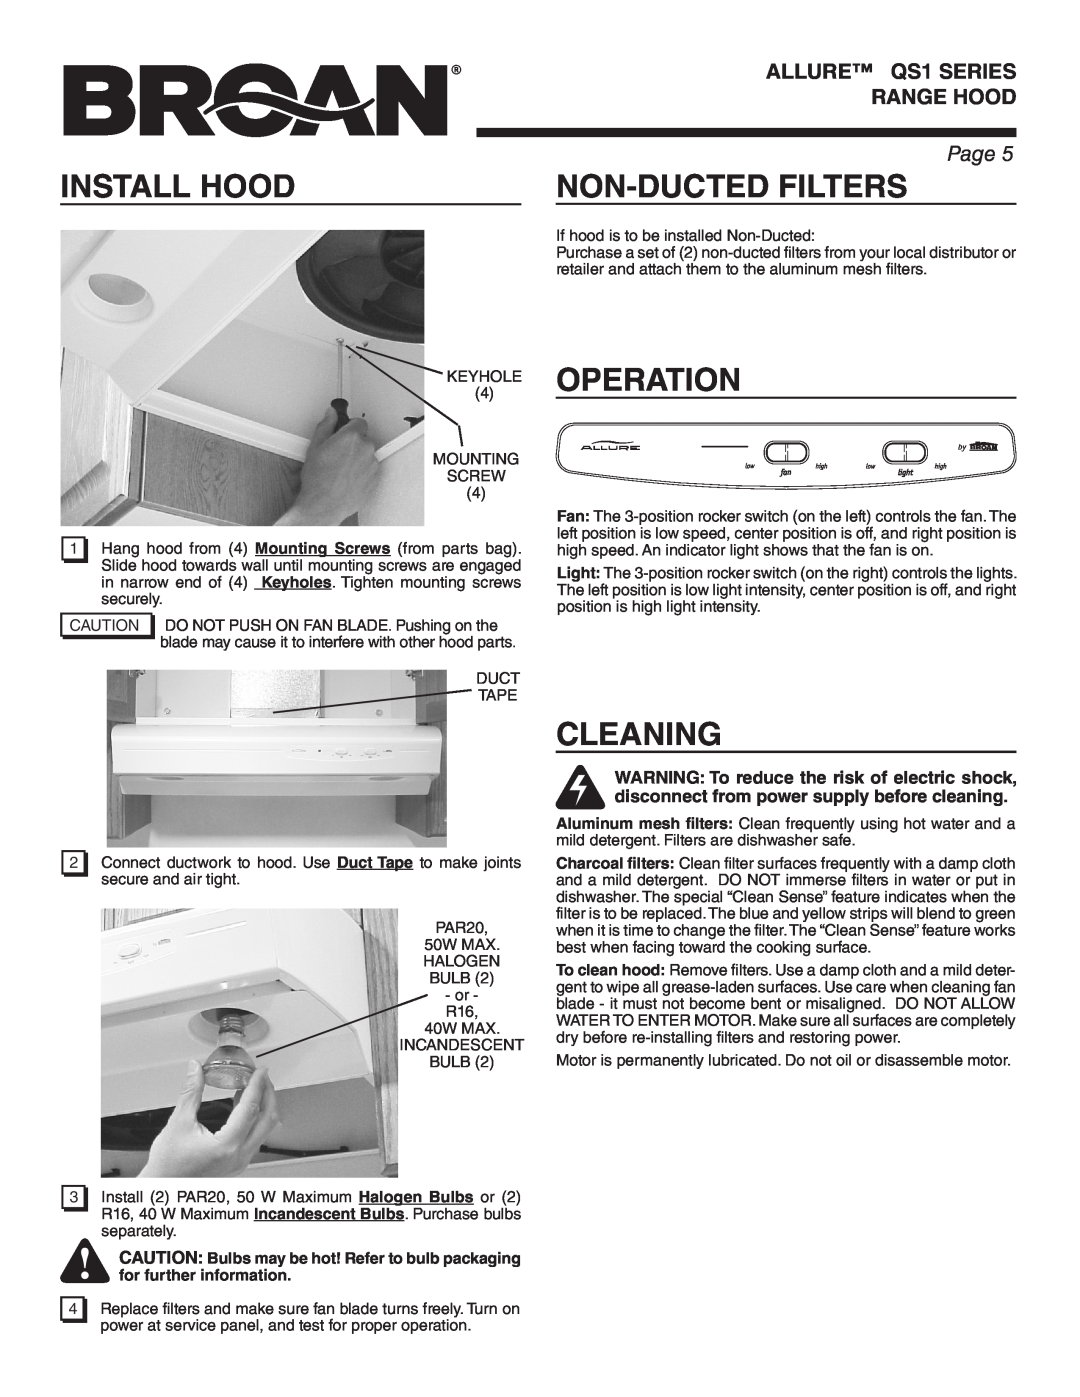 Broan QS136SS manual Install Hood, Non-Ductedfilters, Operation, Cleaning, ALLURE QS1 SERIES RANGE HOOD, Page 